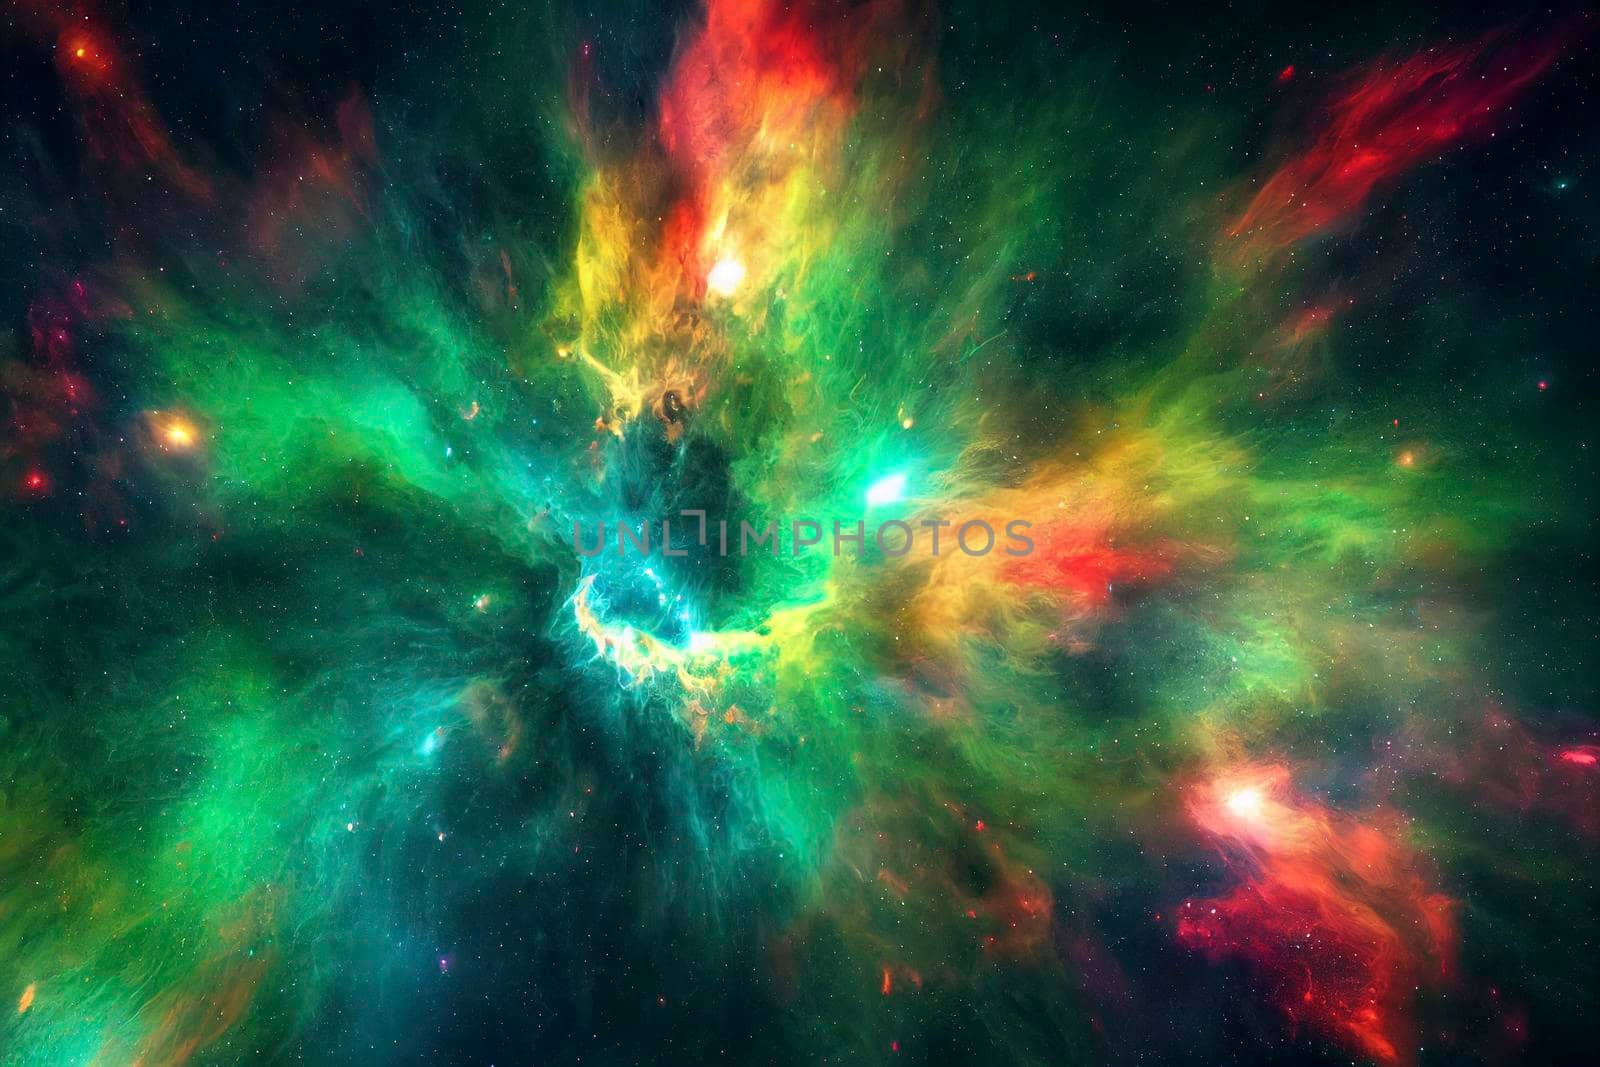 Deep space. Science fiction wallpaper, planets, stars, galaxies and nebulas in awesome cosmic image. by jbruiz78